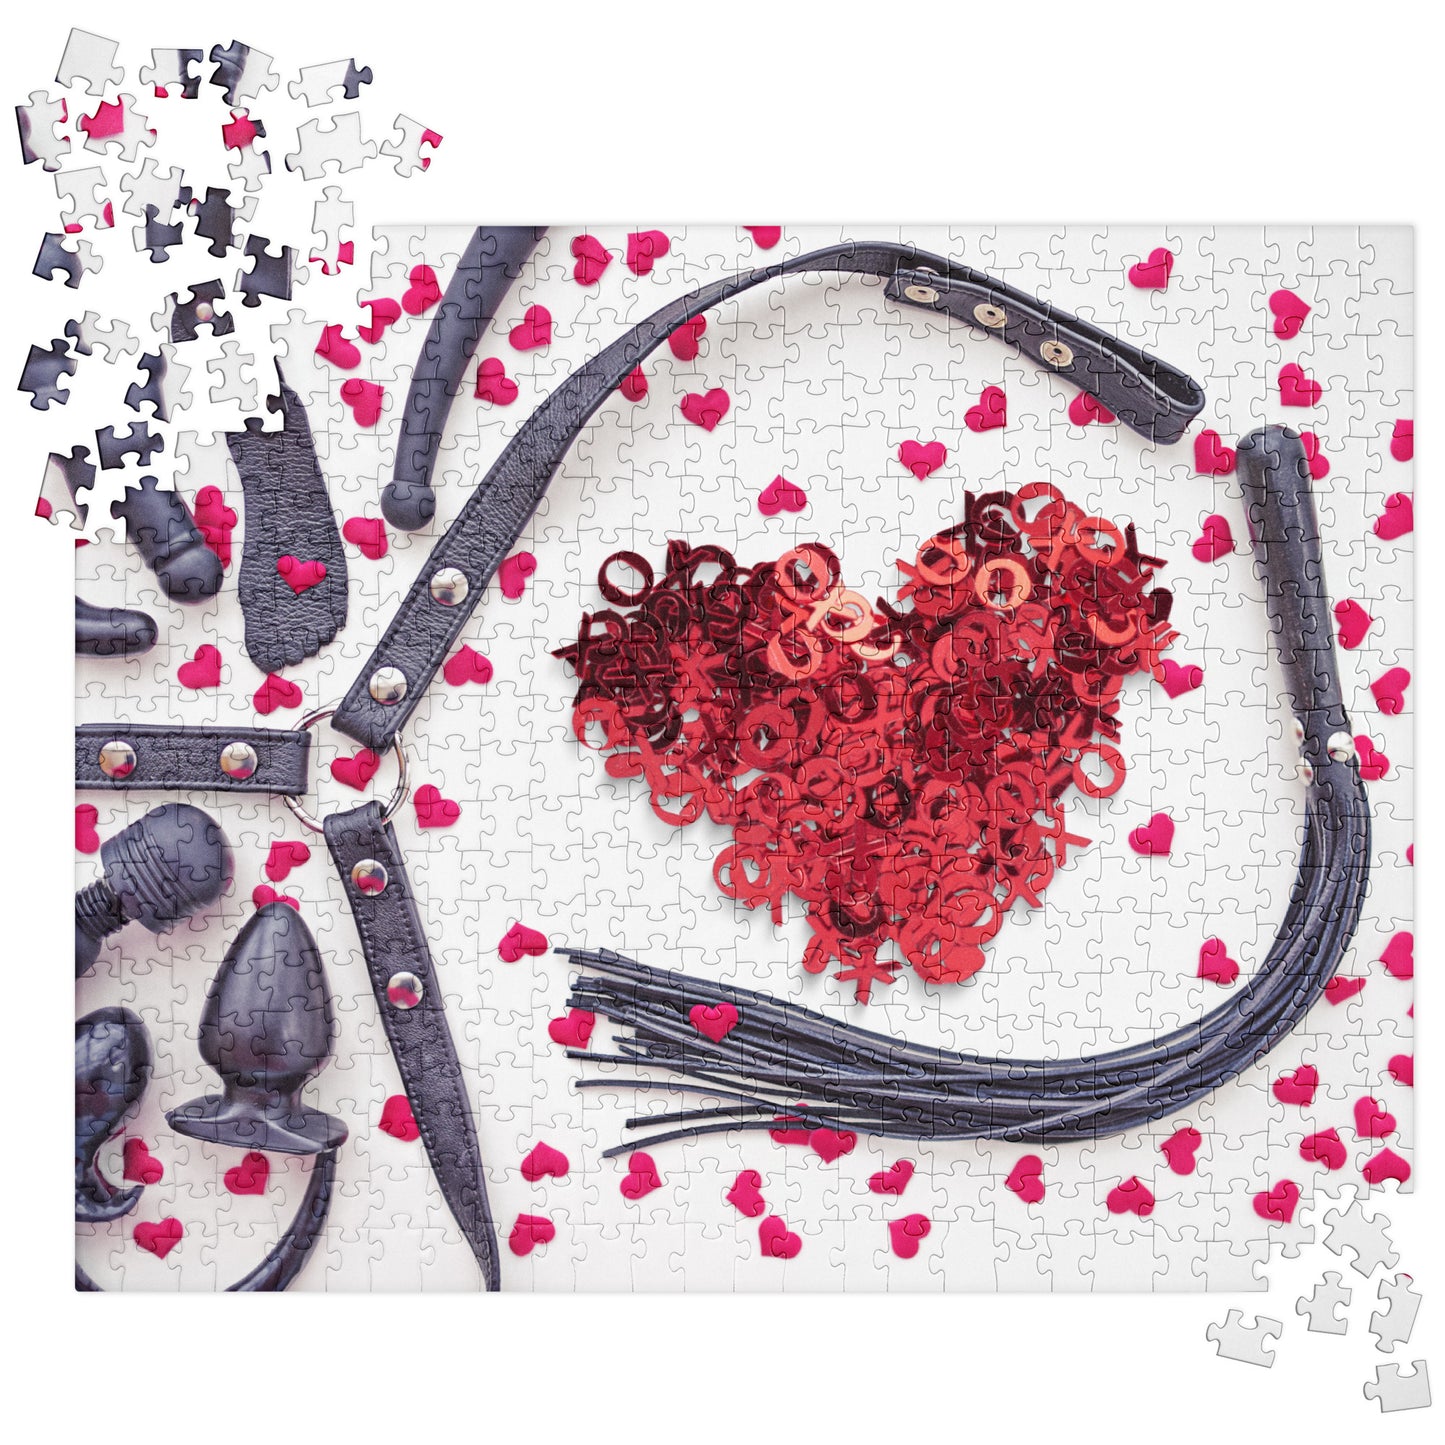 Sensual Jigsaw Puzzle: Sex Toys with XO Hearts